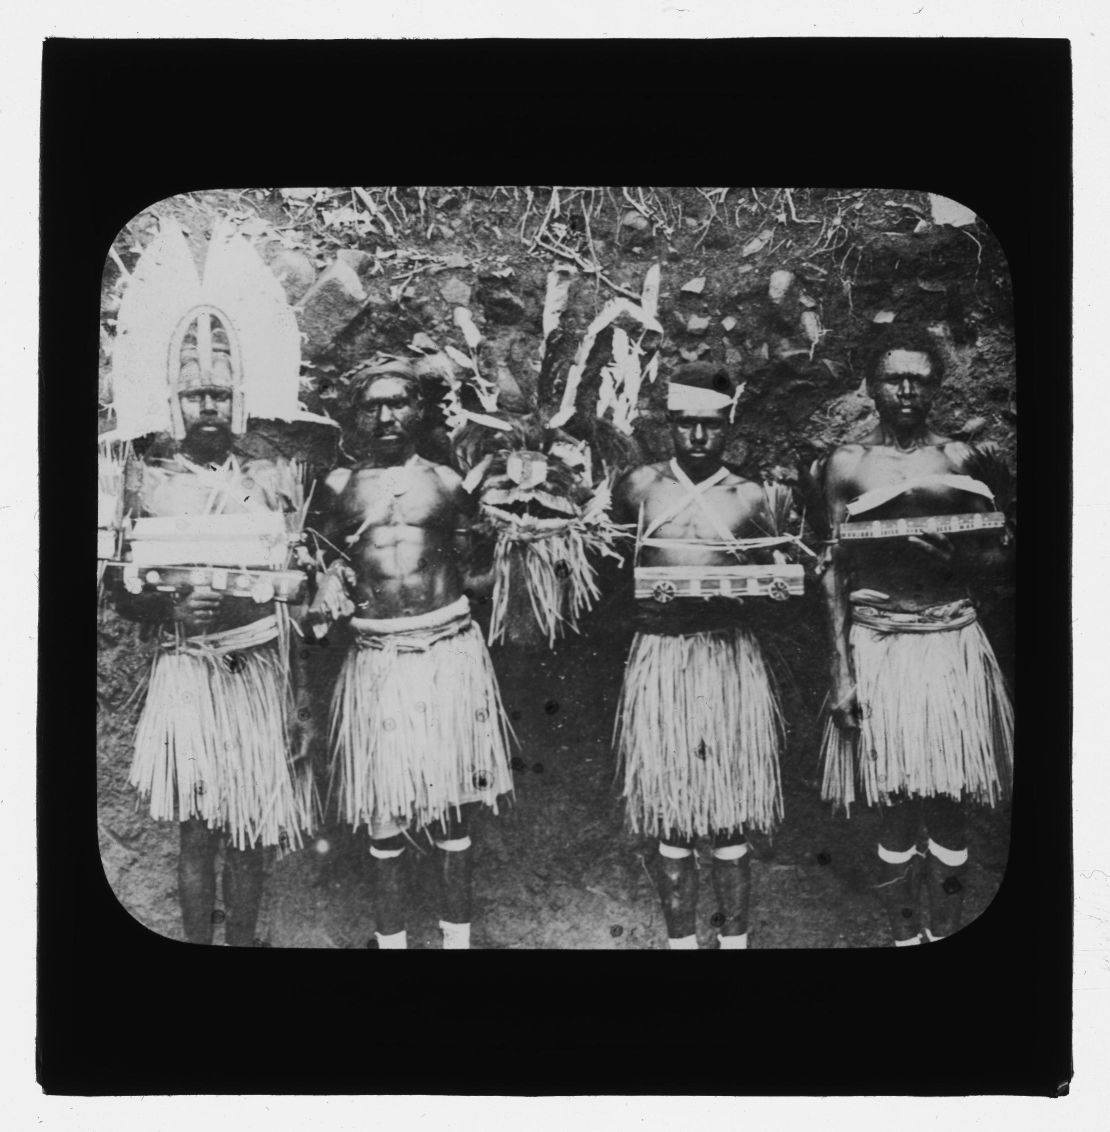 Four Torres Strait men in traditional dress and holding ceremonial objects on Hammond Island in 1905, photographed by Otto Watson.